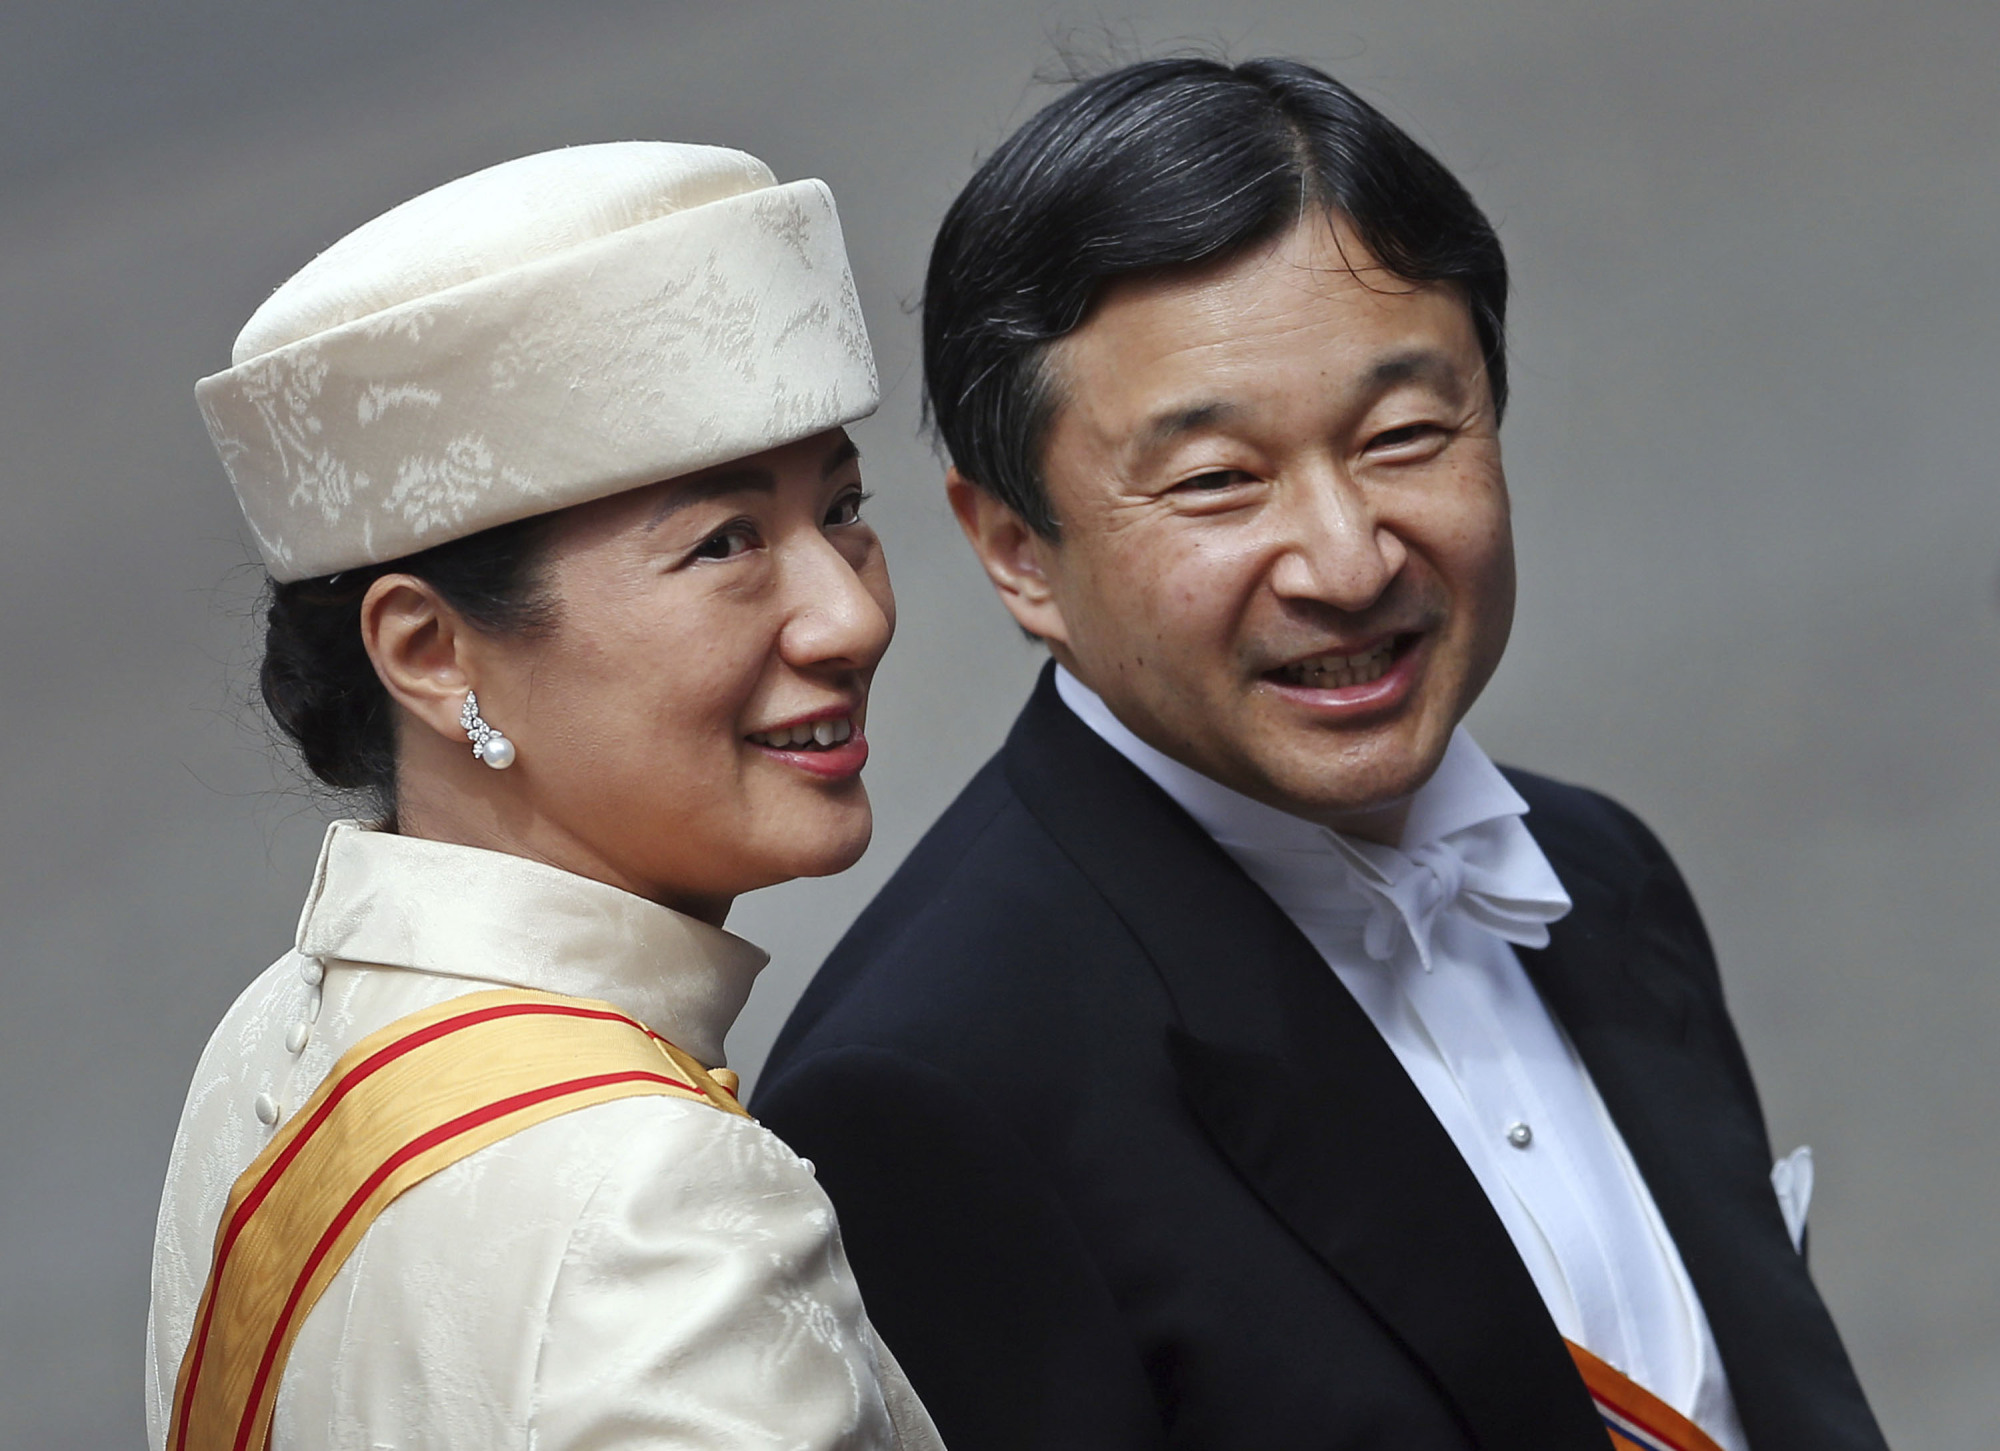 Crown Prince Naruhito and Crown Princess Masako are set to become the Emperor and Empress on Wednesday following the abdication of his father, Emperor Akihito. The Crown Prince's formal enthronement will take place at a more elaborate ceremony in October. | AP